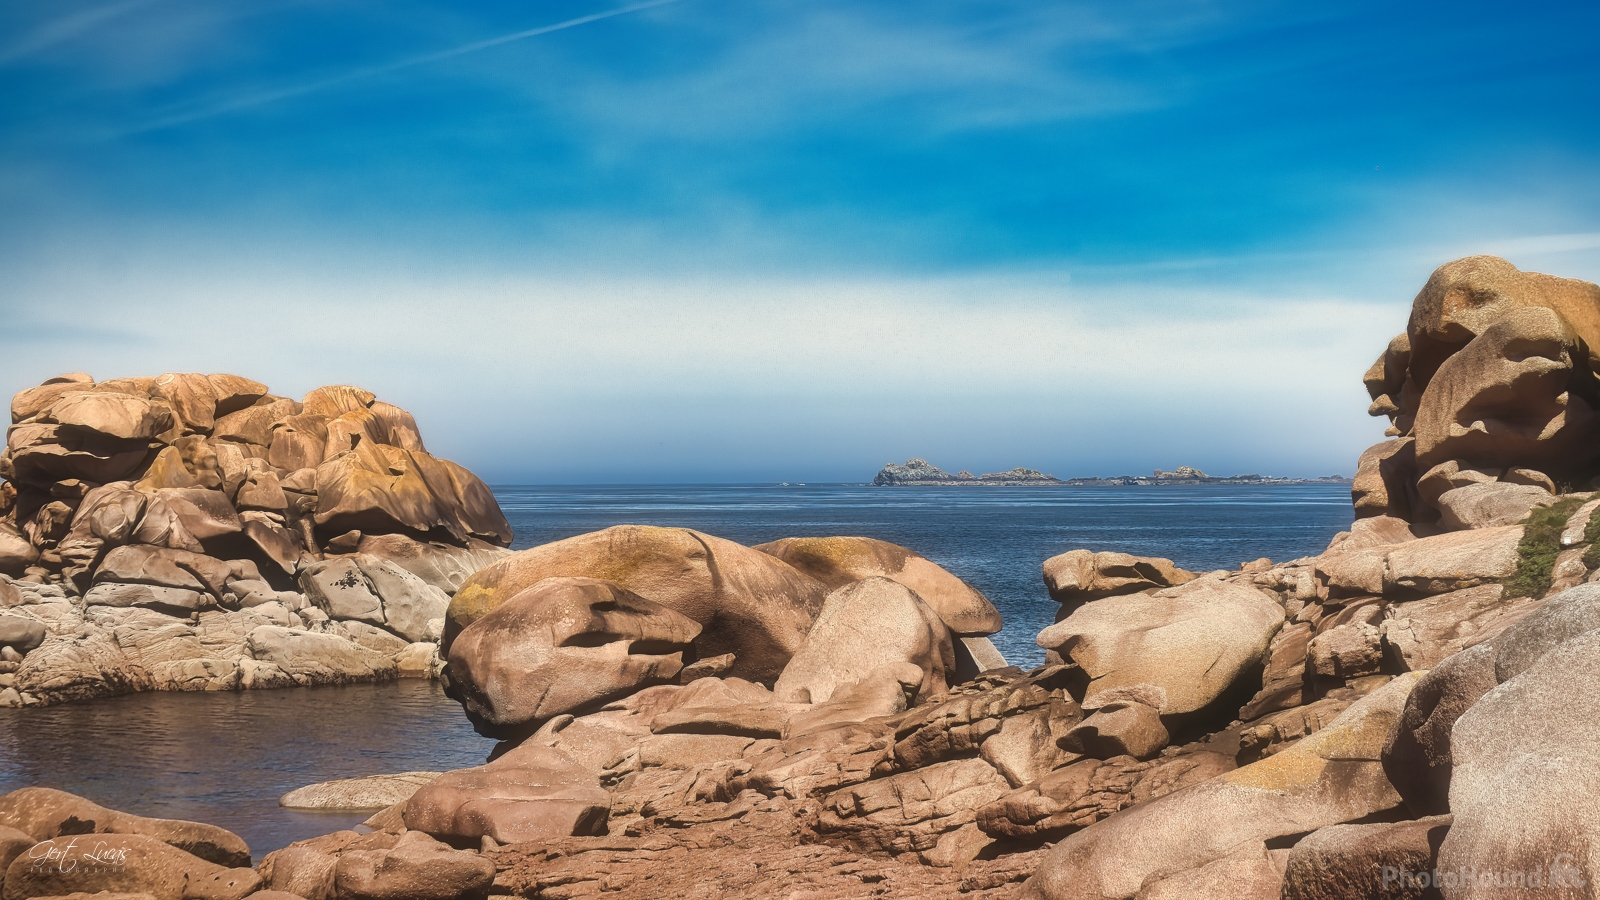 Image of The cove of Pors Kamor, Perros-Guirec, France by Gert Lucas